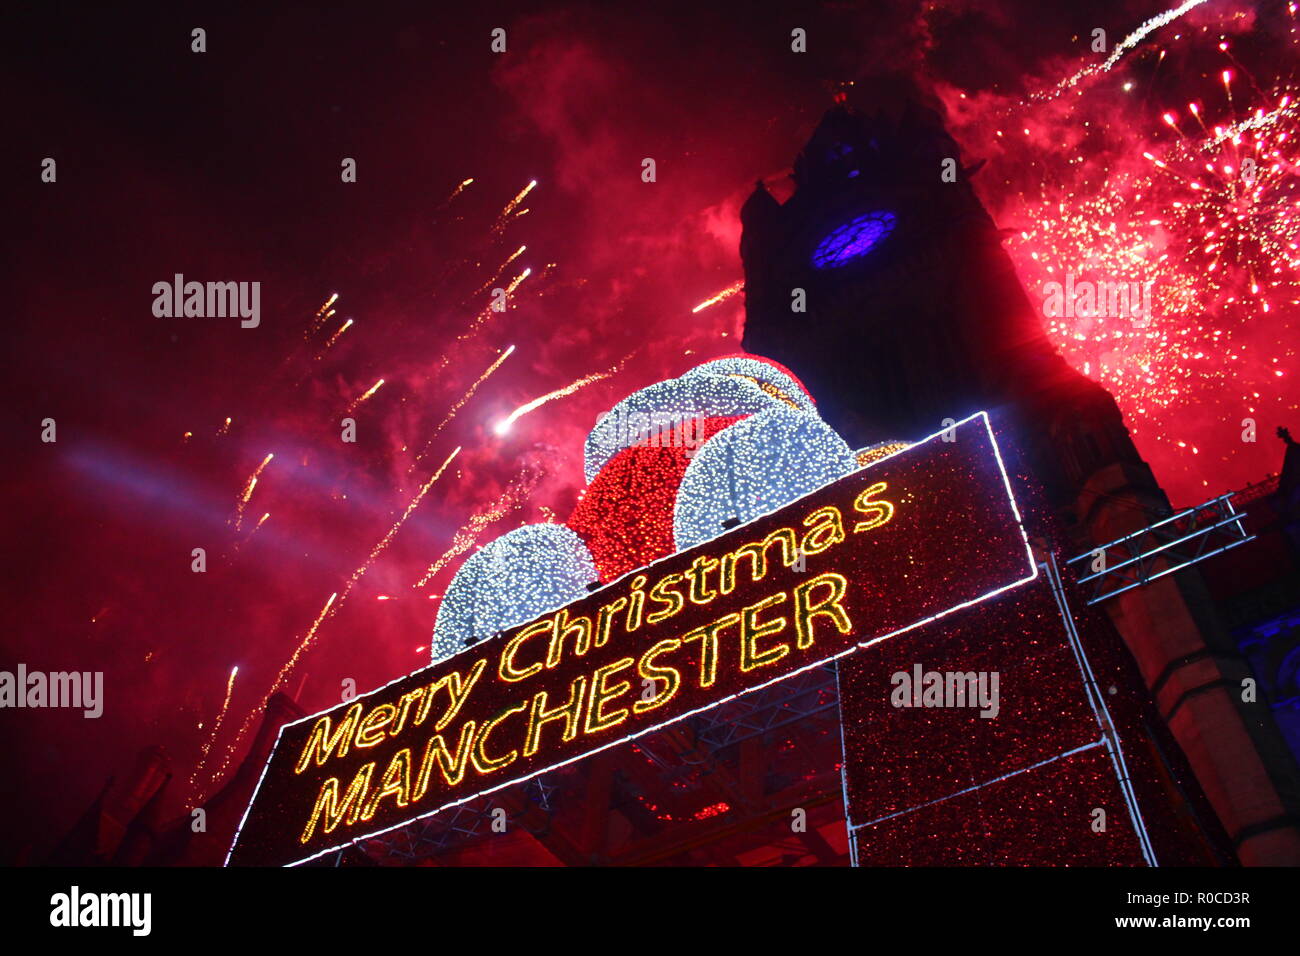 Manchester Christmas Lights Switch On With Fireworks Stock Photo